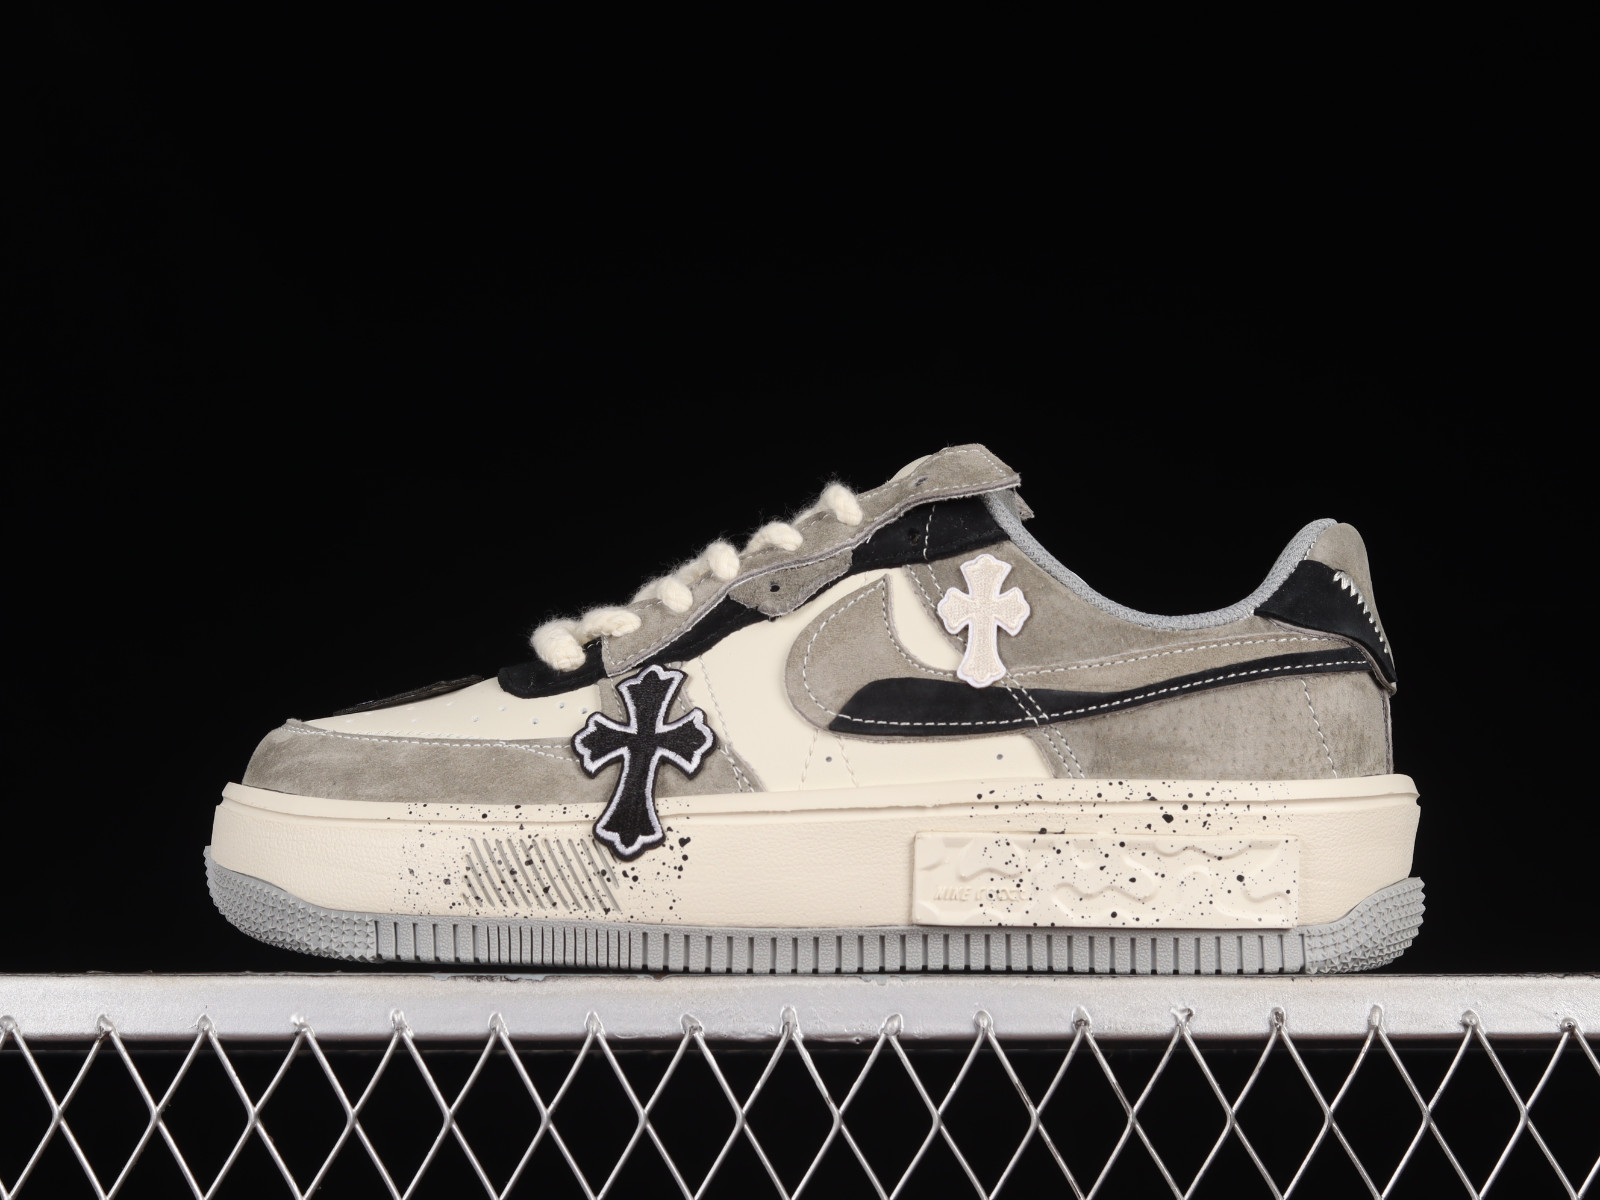 lunar eclipse running shoes for women 2019 803 - GmarShops - Chrome Hearts x india Nike Air Force 1 07 Low Dark Grey Black CW6688